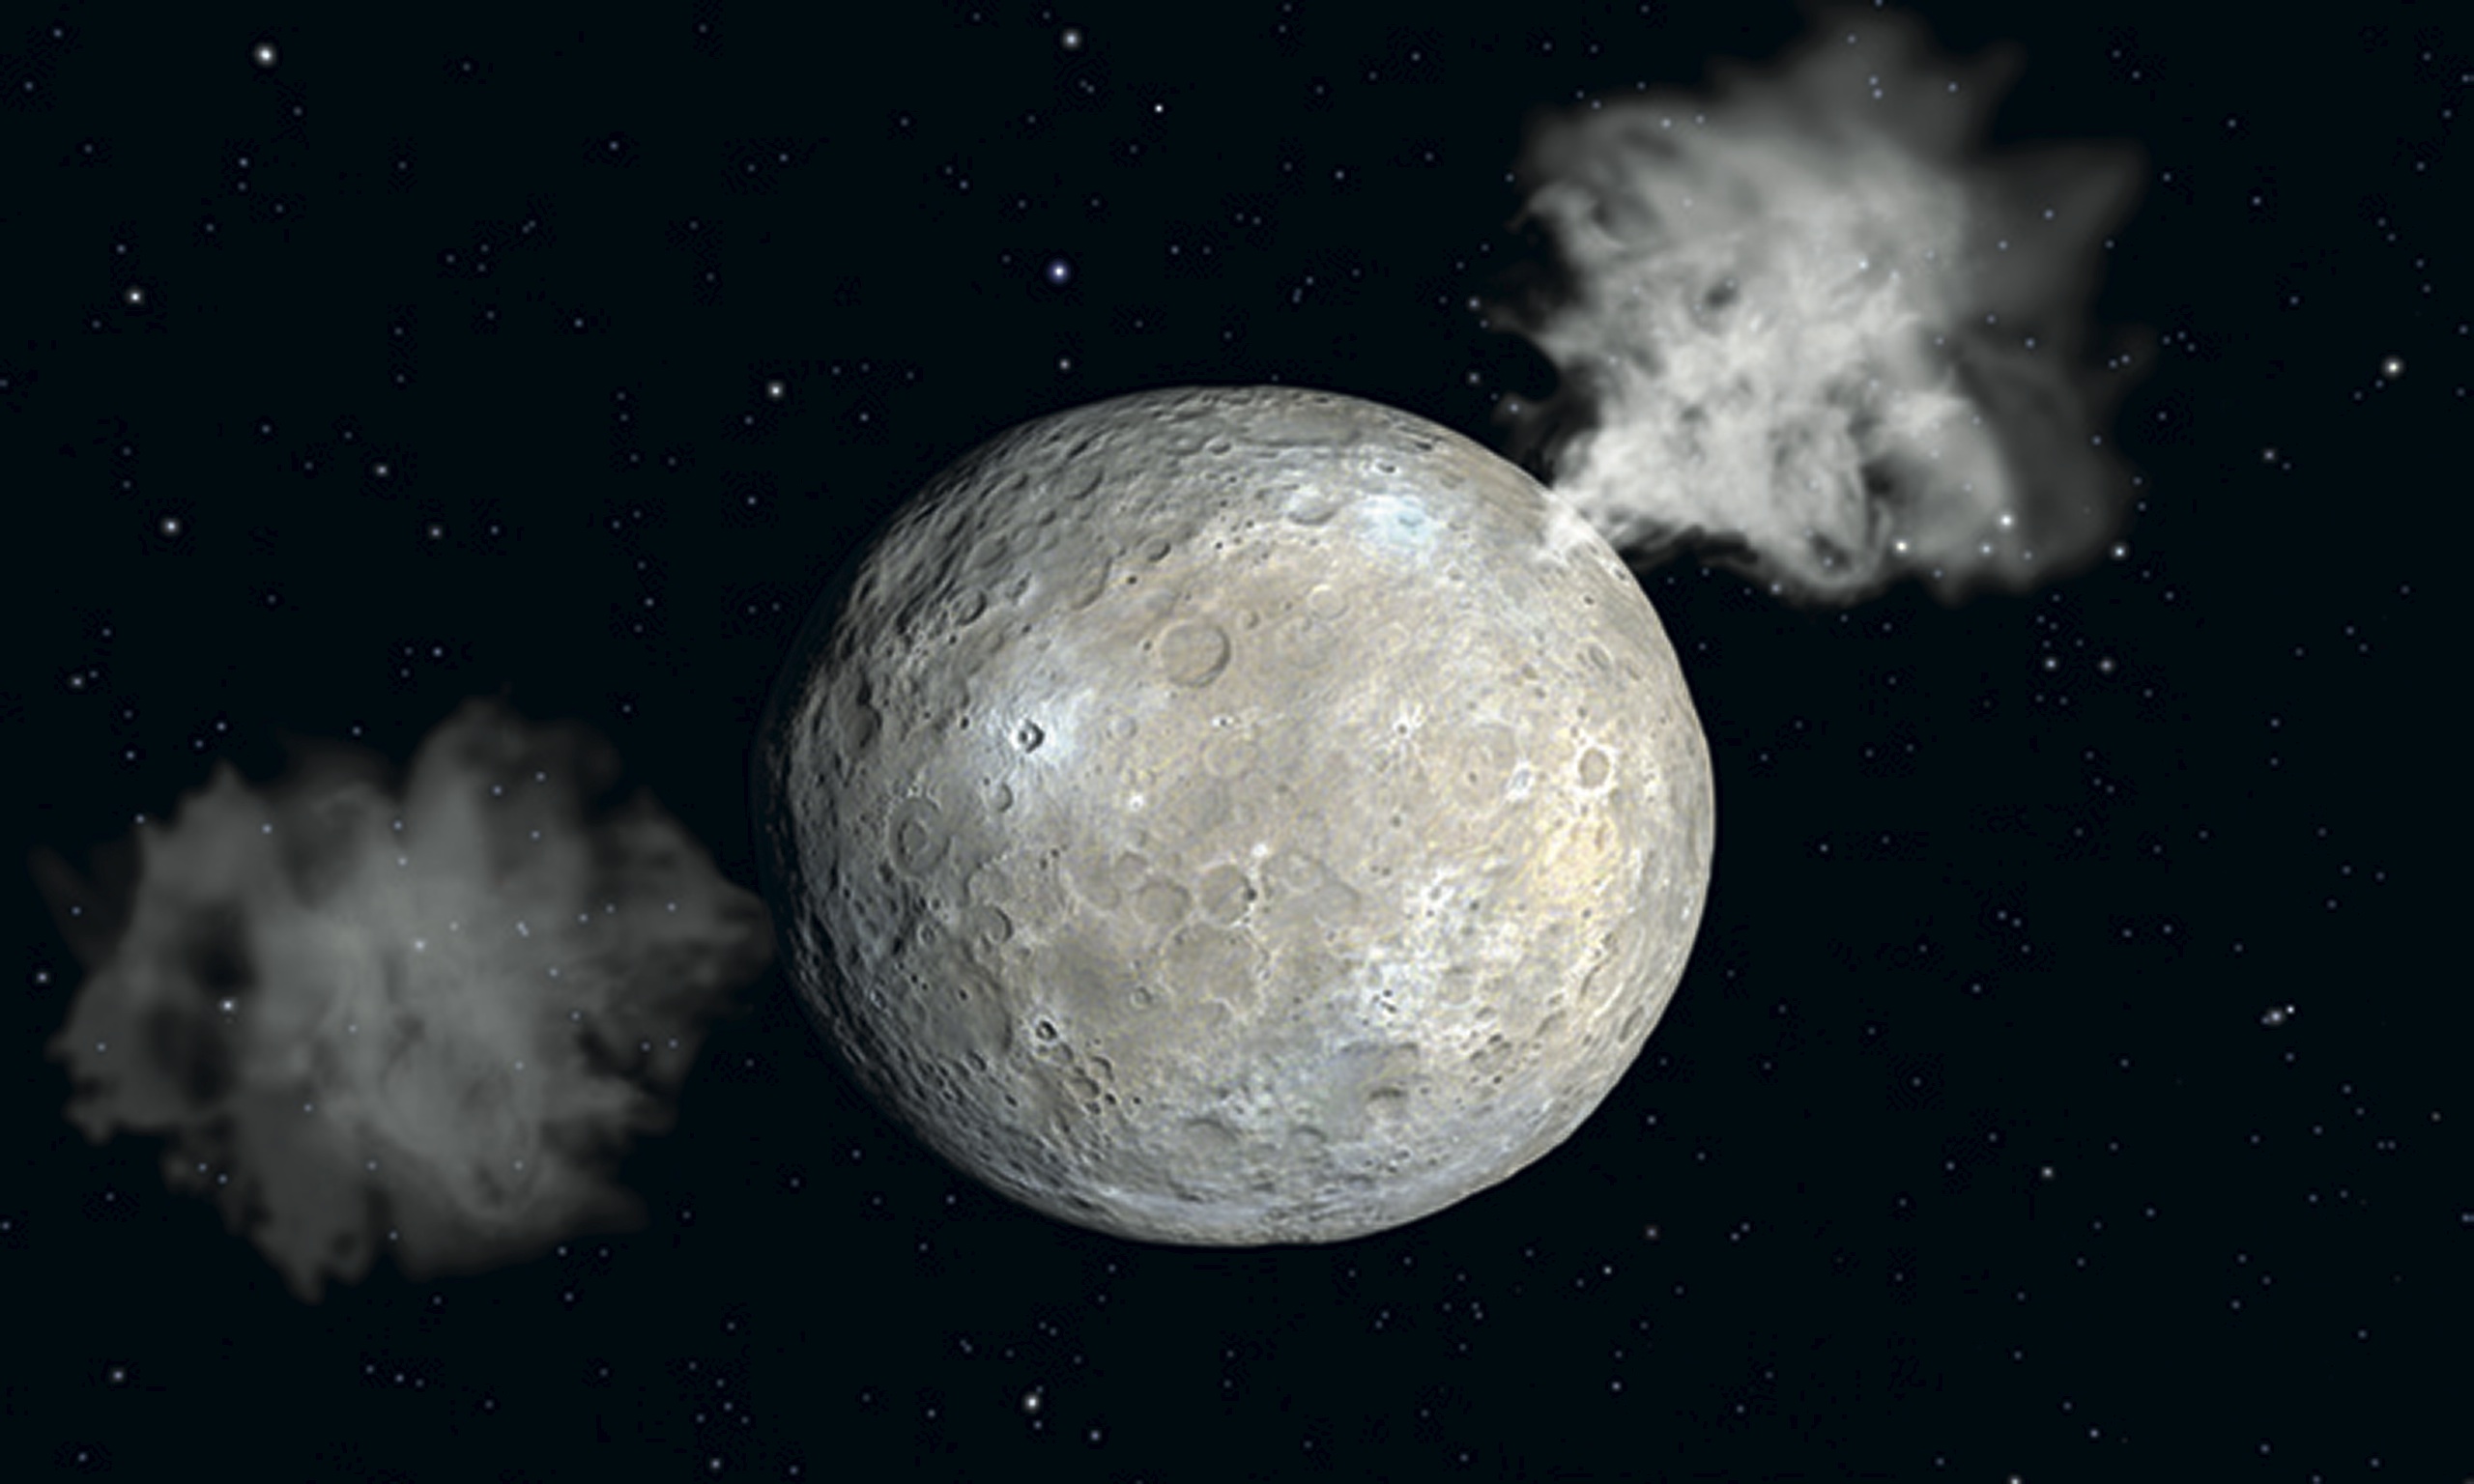 How Close to 20/20 Can You Get on This General Knowledge Test? Asteroid Ceres with twin jets of steam